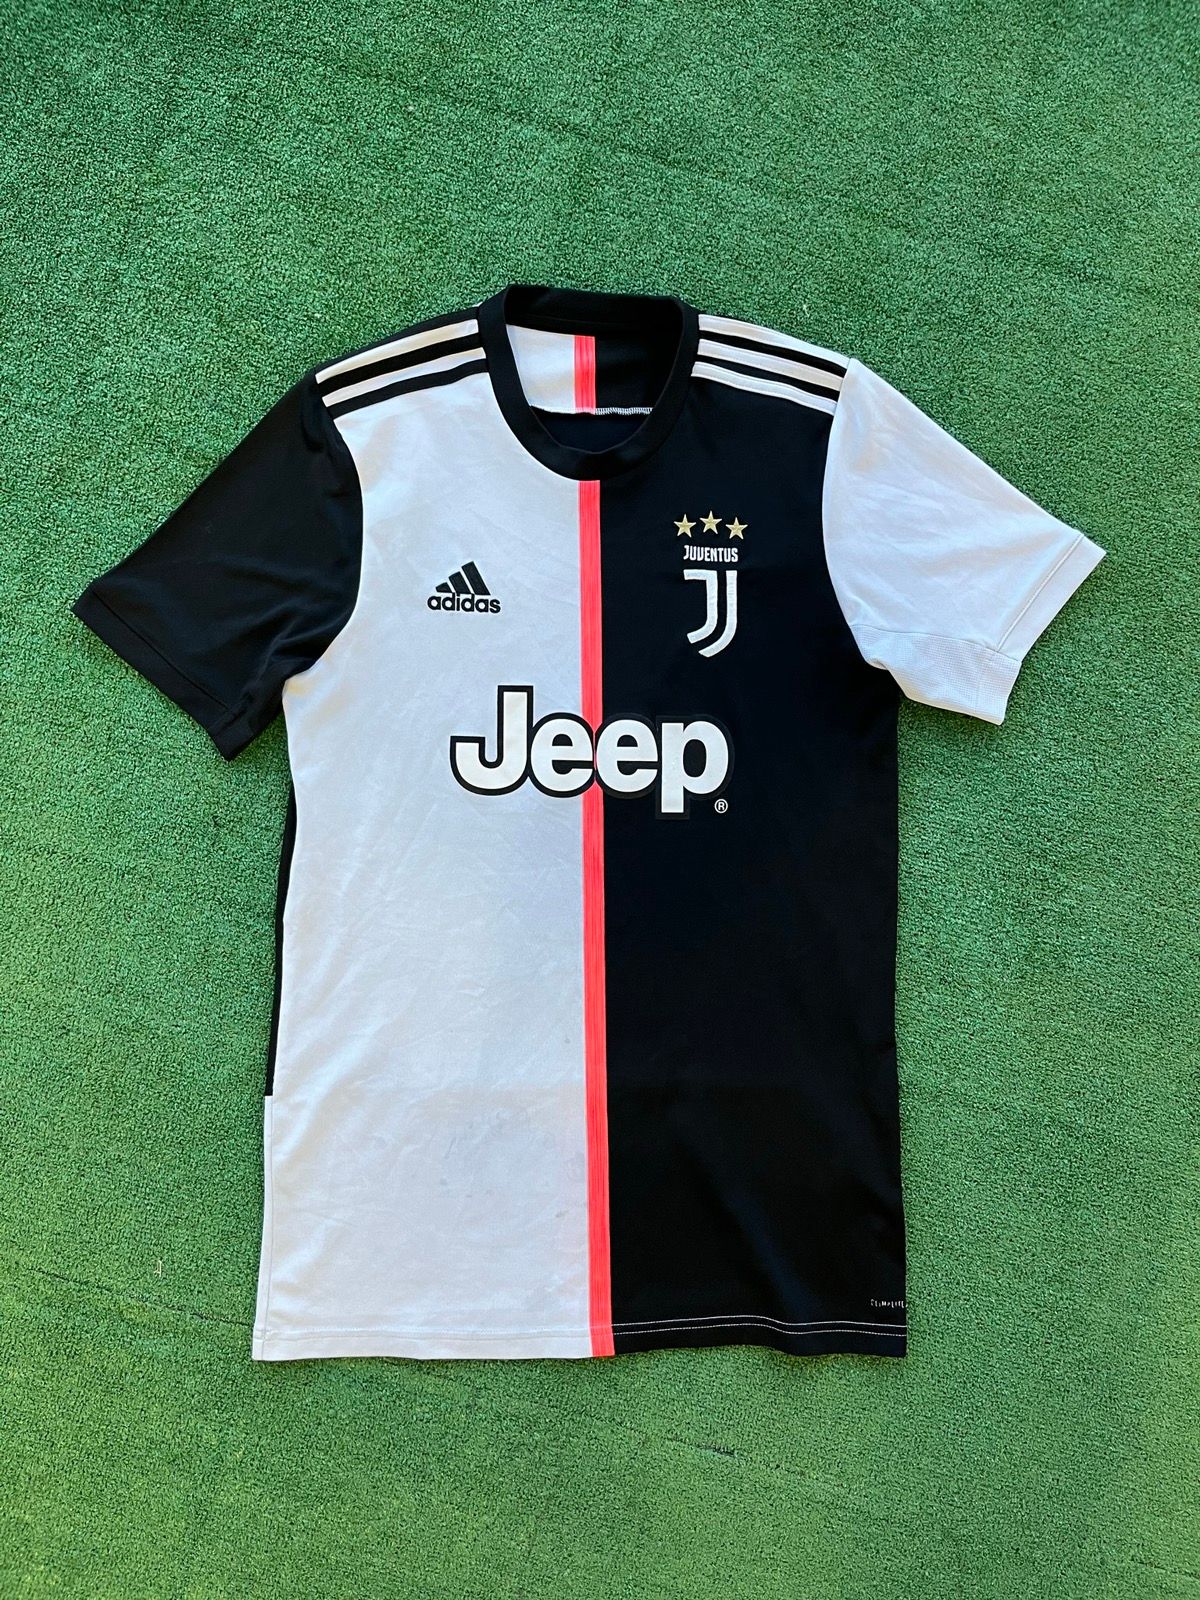 Pre-owned Adidas X Vintage Blokecore Adidas 2019 Juventus Home Football Jersey Shirt In Black